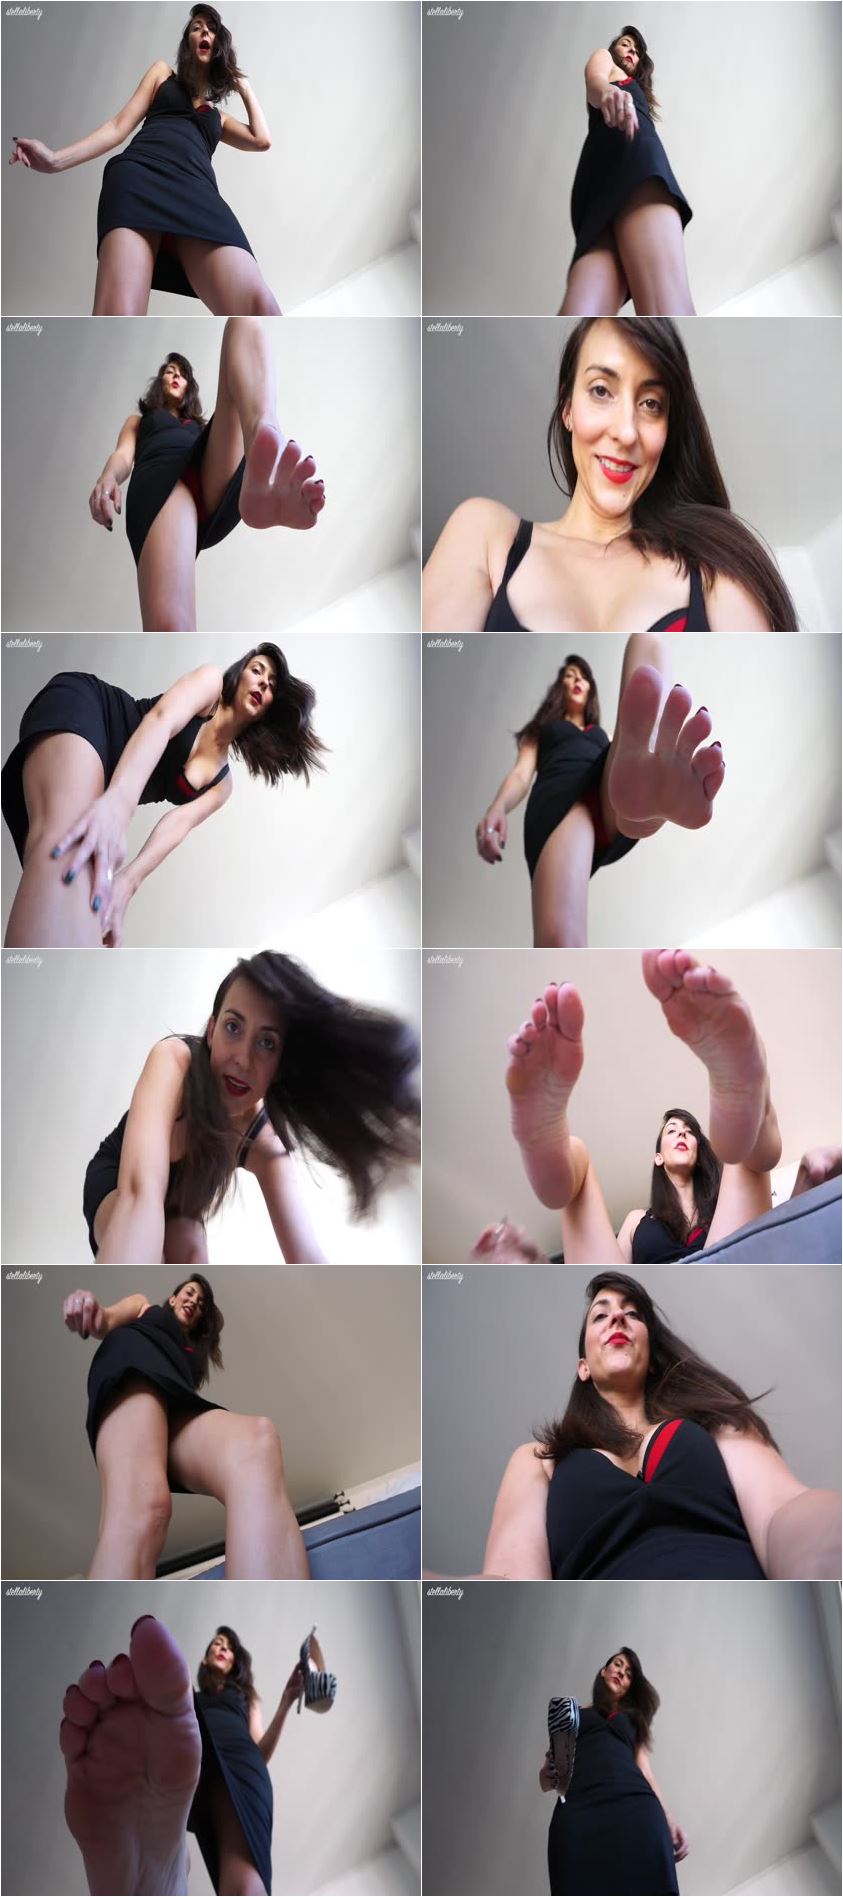 best of Shrink model know giantess dont